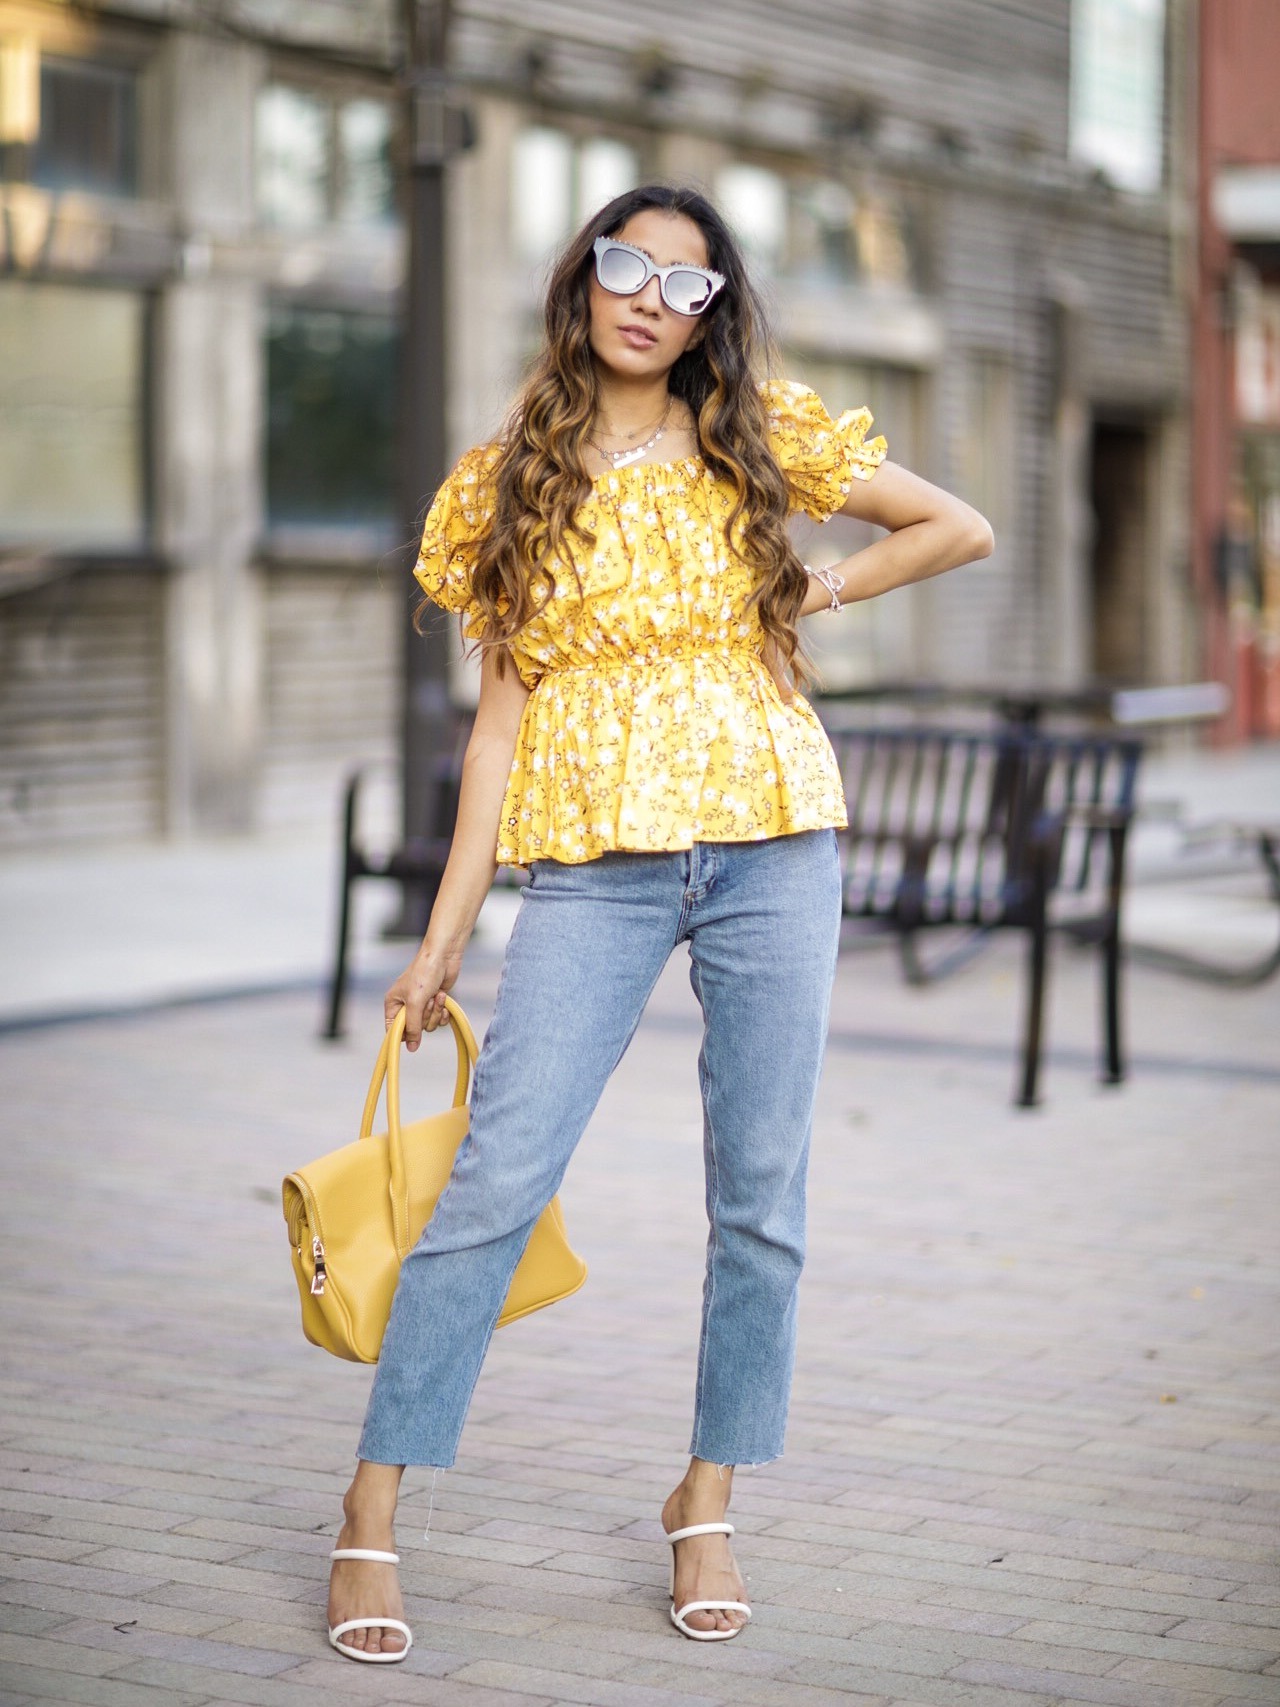 Puffy Sleeves Everyone's Raving About Shein Floral Puff Sleeve Peplum Blouse Faiza Inam SincerelyHumble Summer Fashion 3